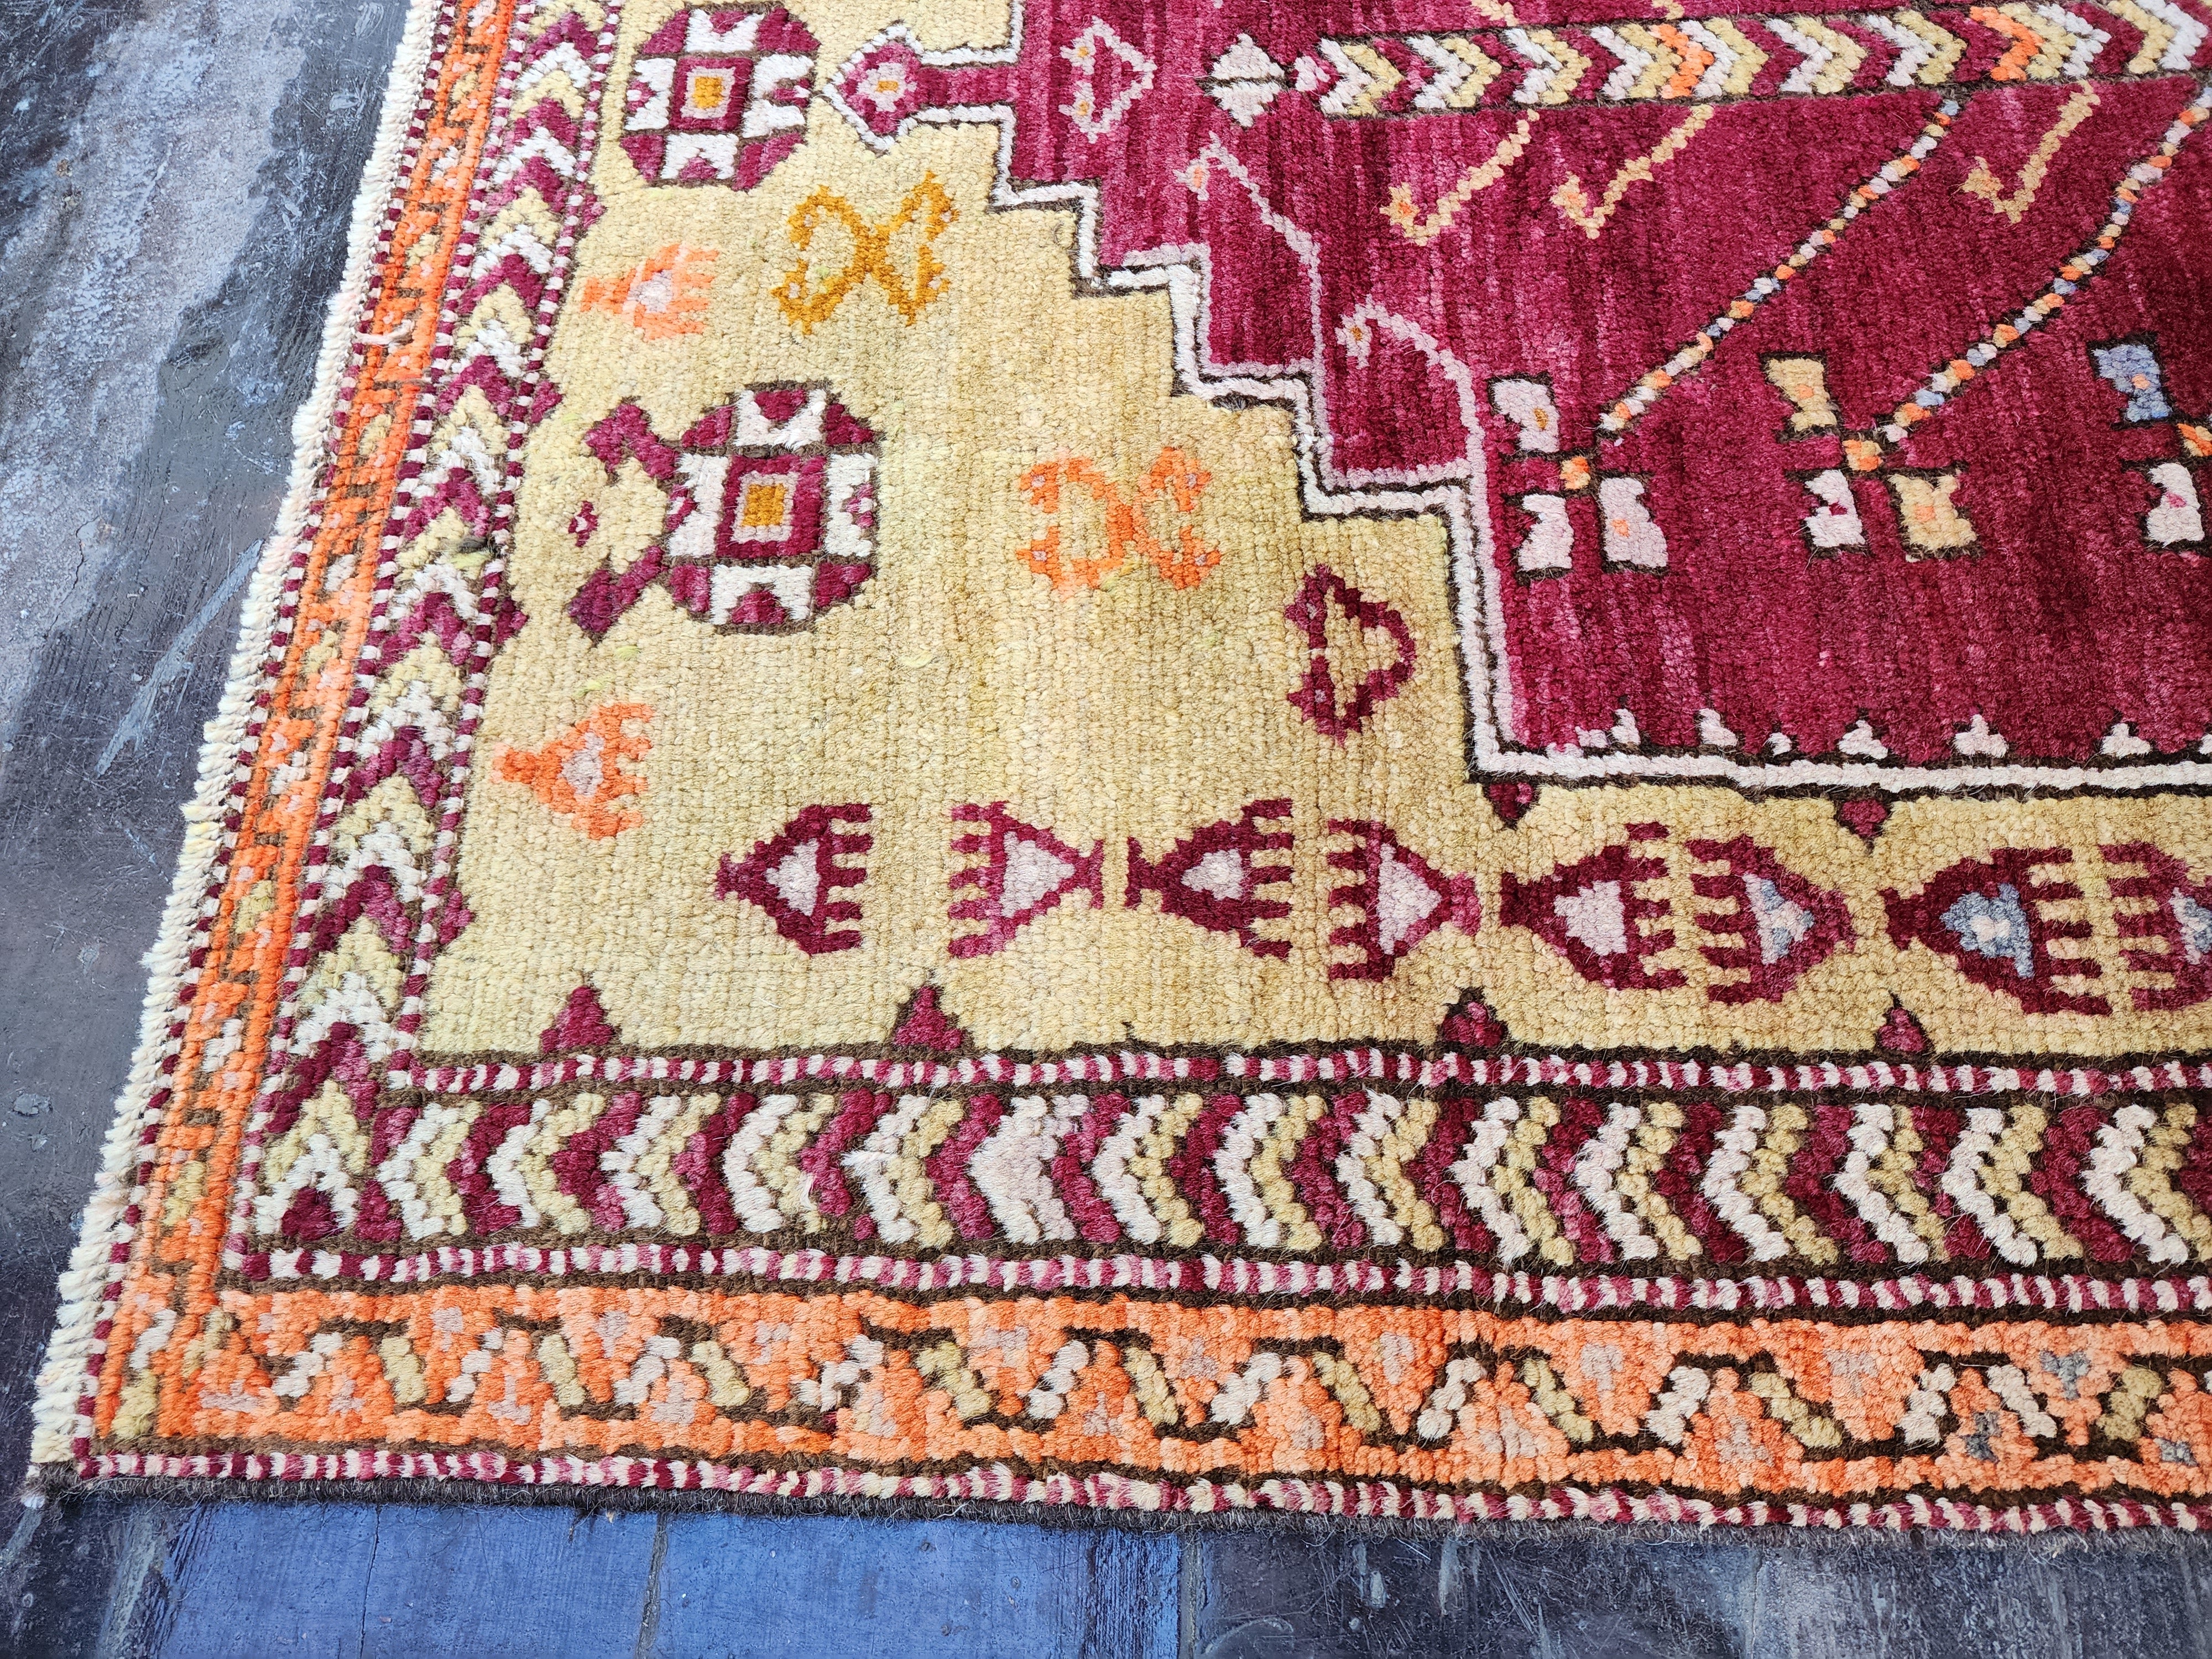 Antique Turkish Rug, 5 ft 5 in x 3 ft 6 in, Red, Green and Yellow Tree of Life Motif Turkish Carpet Handmade in Adana from Natural Wool